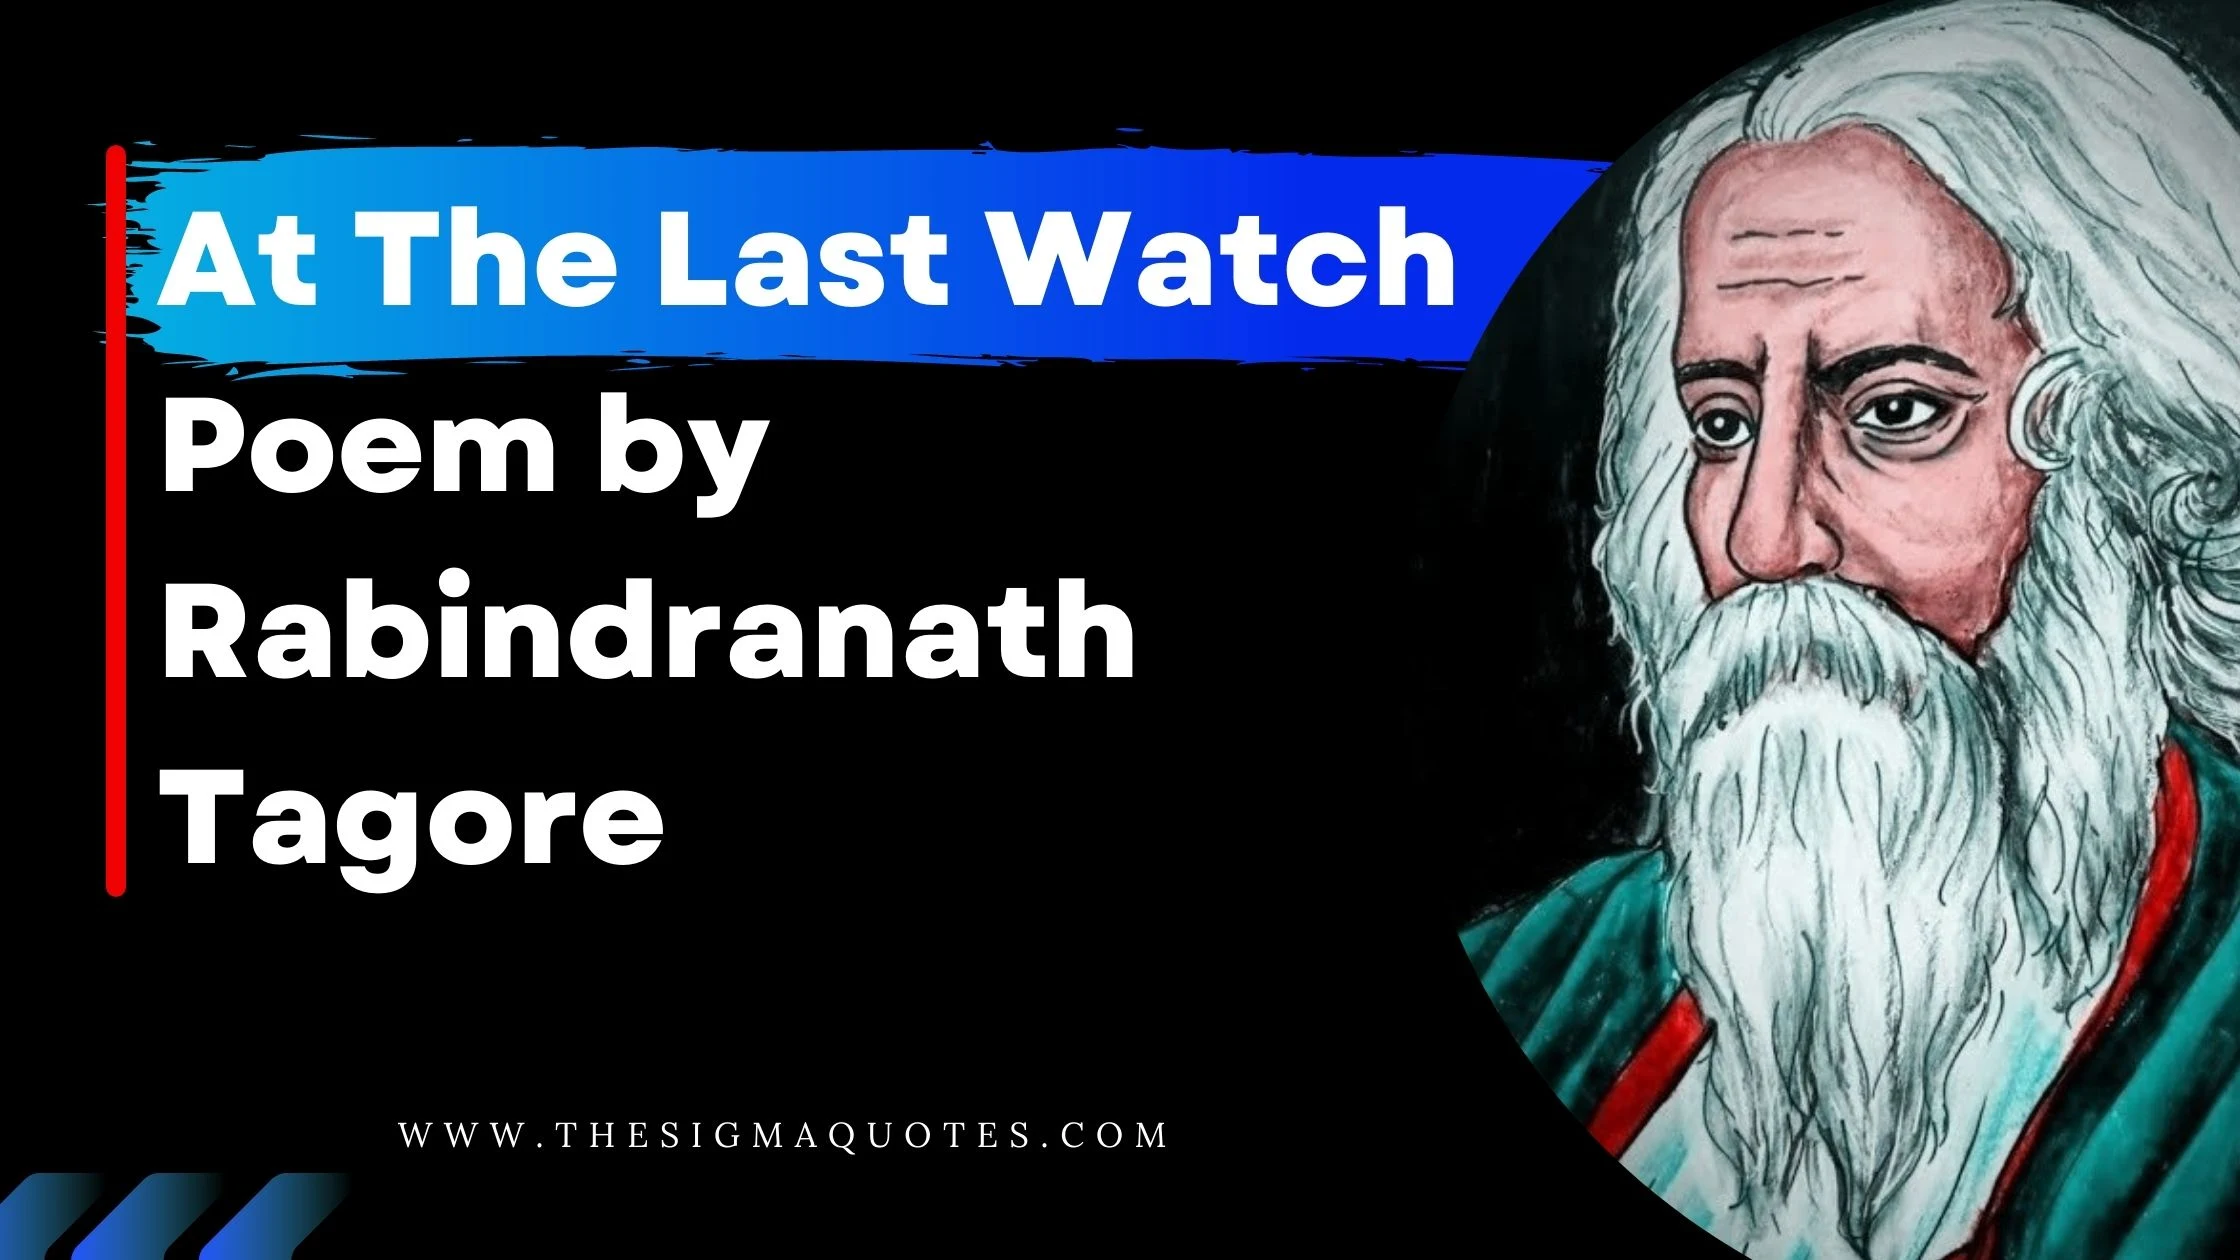 At the last watch poem by rabindranath tagore